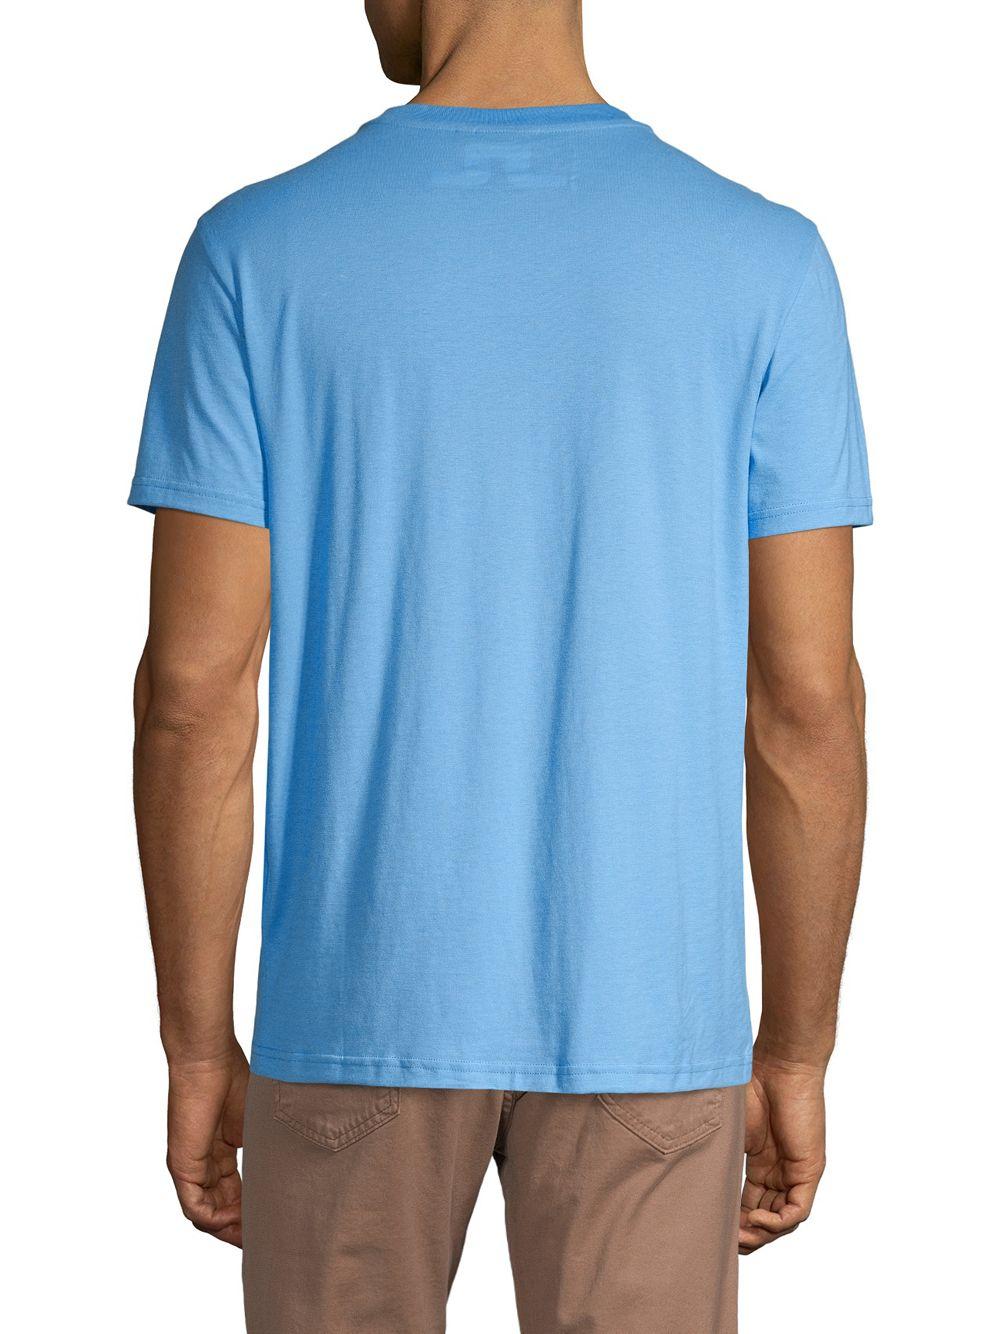 J.Lindeberg Mountain Embroidery Cotton Tee in Blue for Men - Lyst